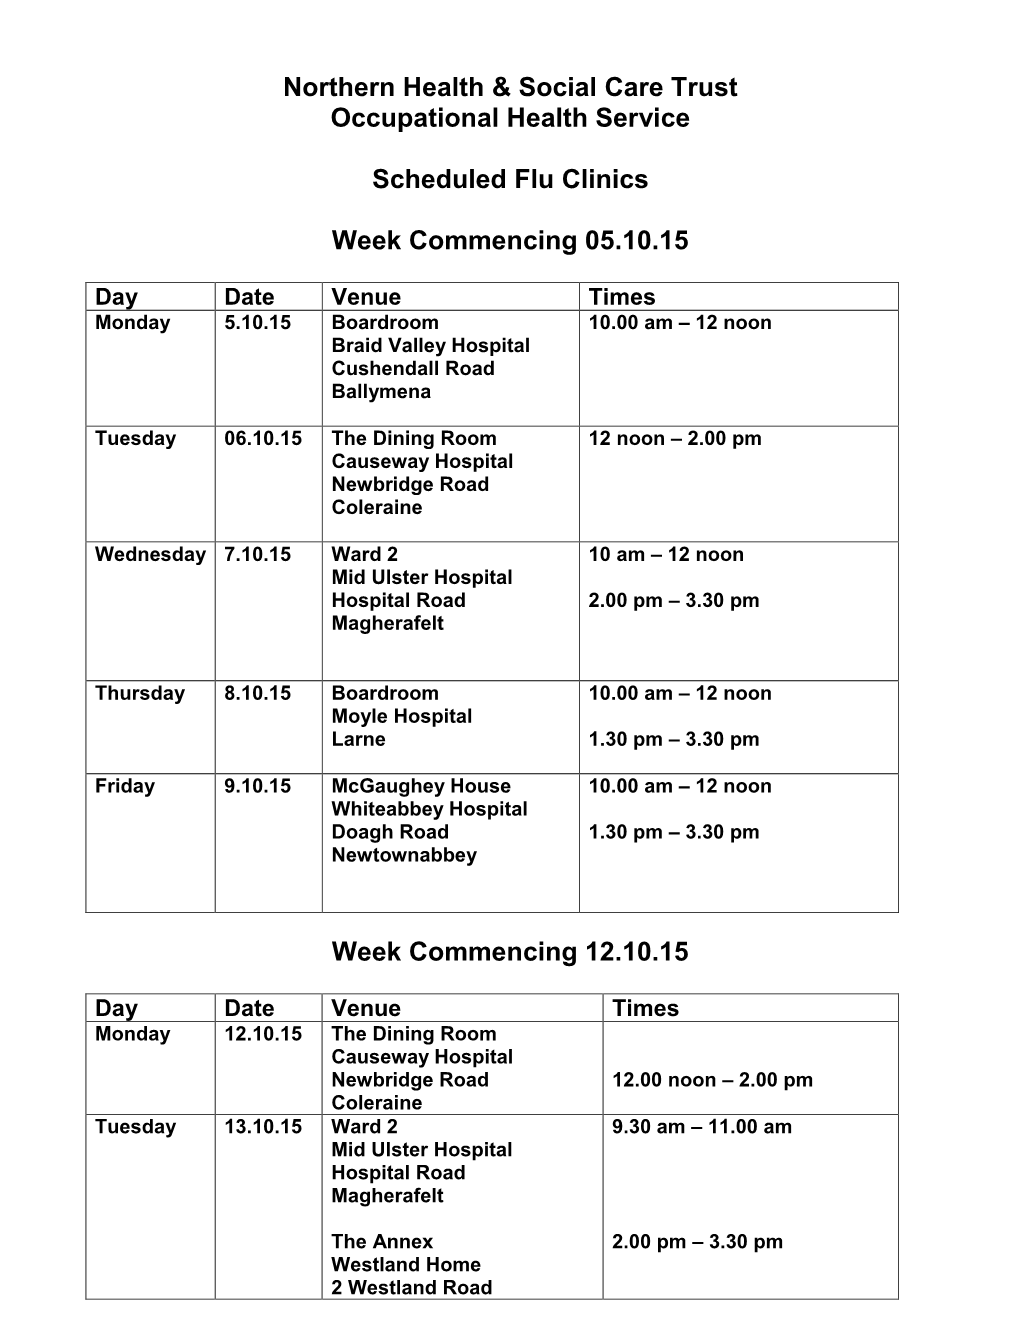 Northern Health & Social Care Trust Occupational Health Service Scheduled Flu Clinics Week Commencing 05.10.15 Week Commenci